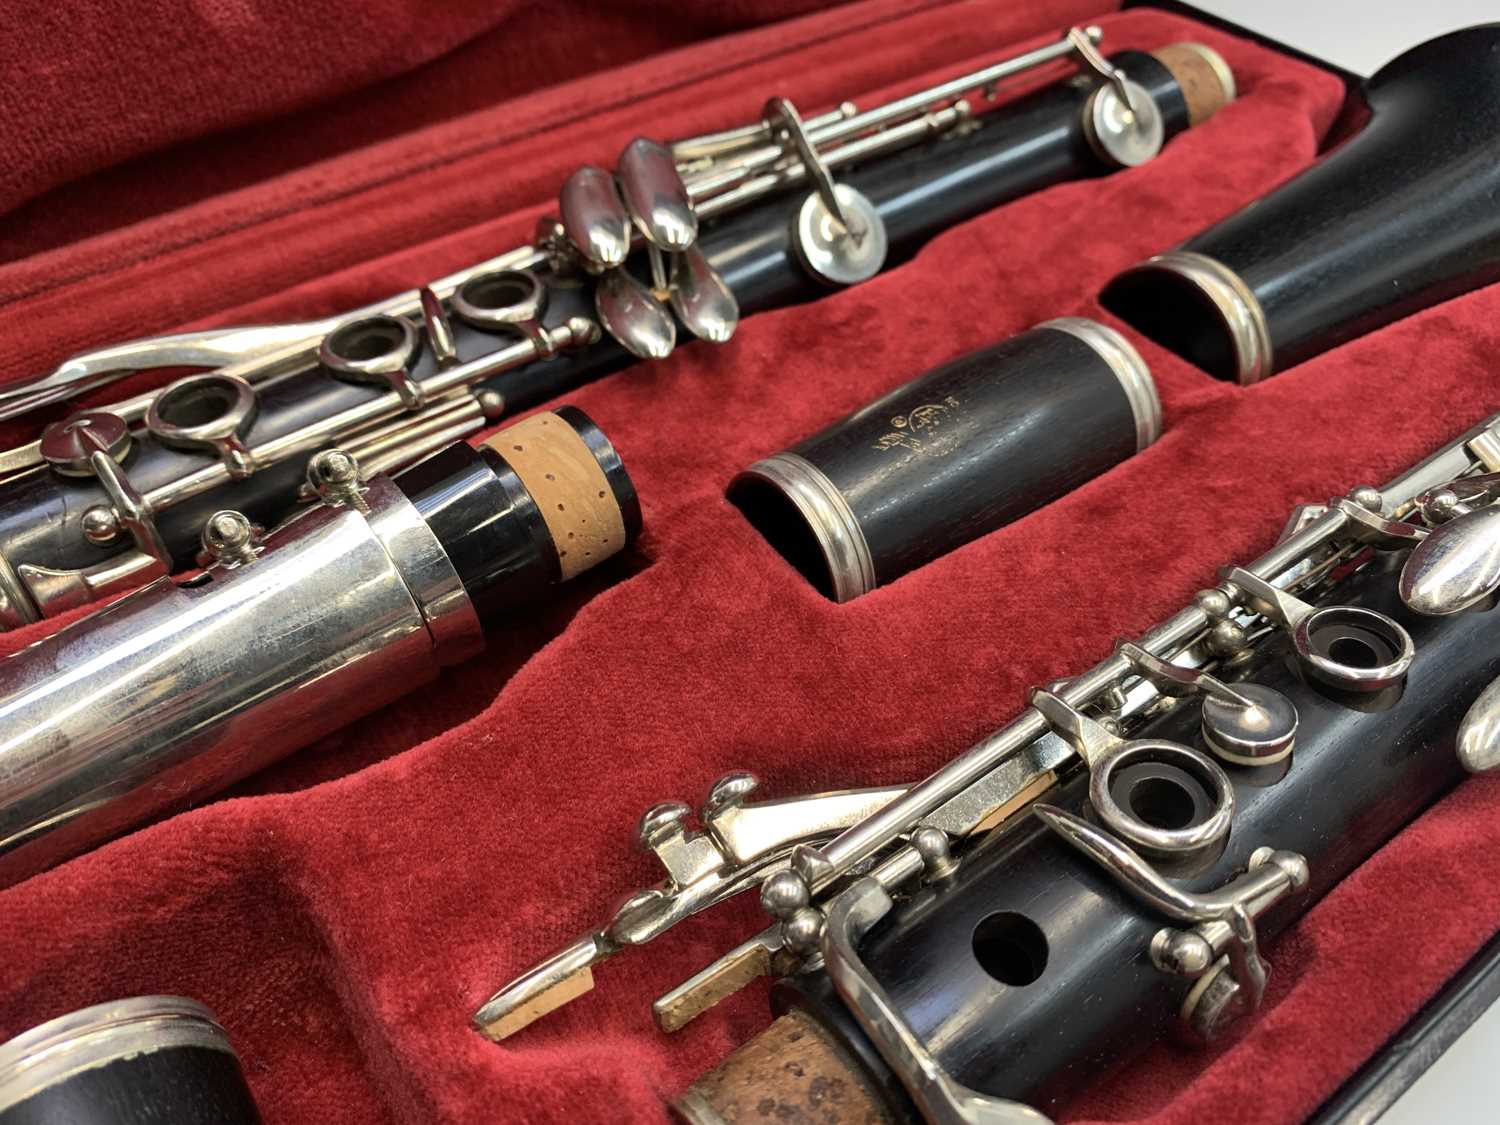 A Boosey & Hawkes Edgware model clarinet, with nickel mounts, number 274097A, in hard case. - Image 3 of 12